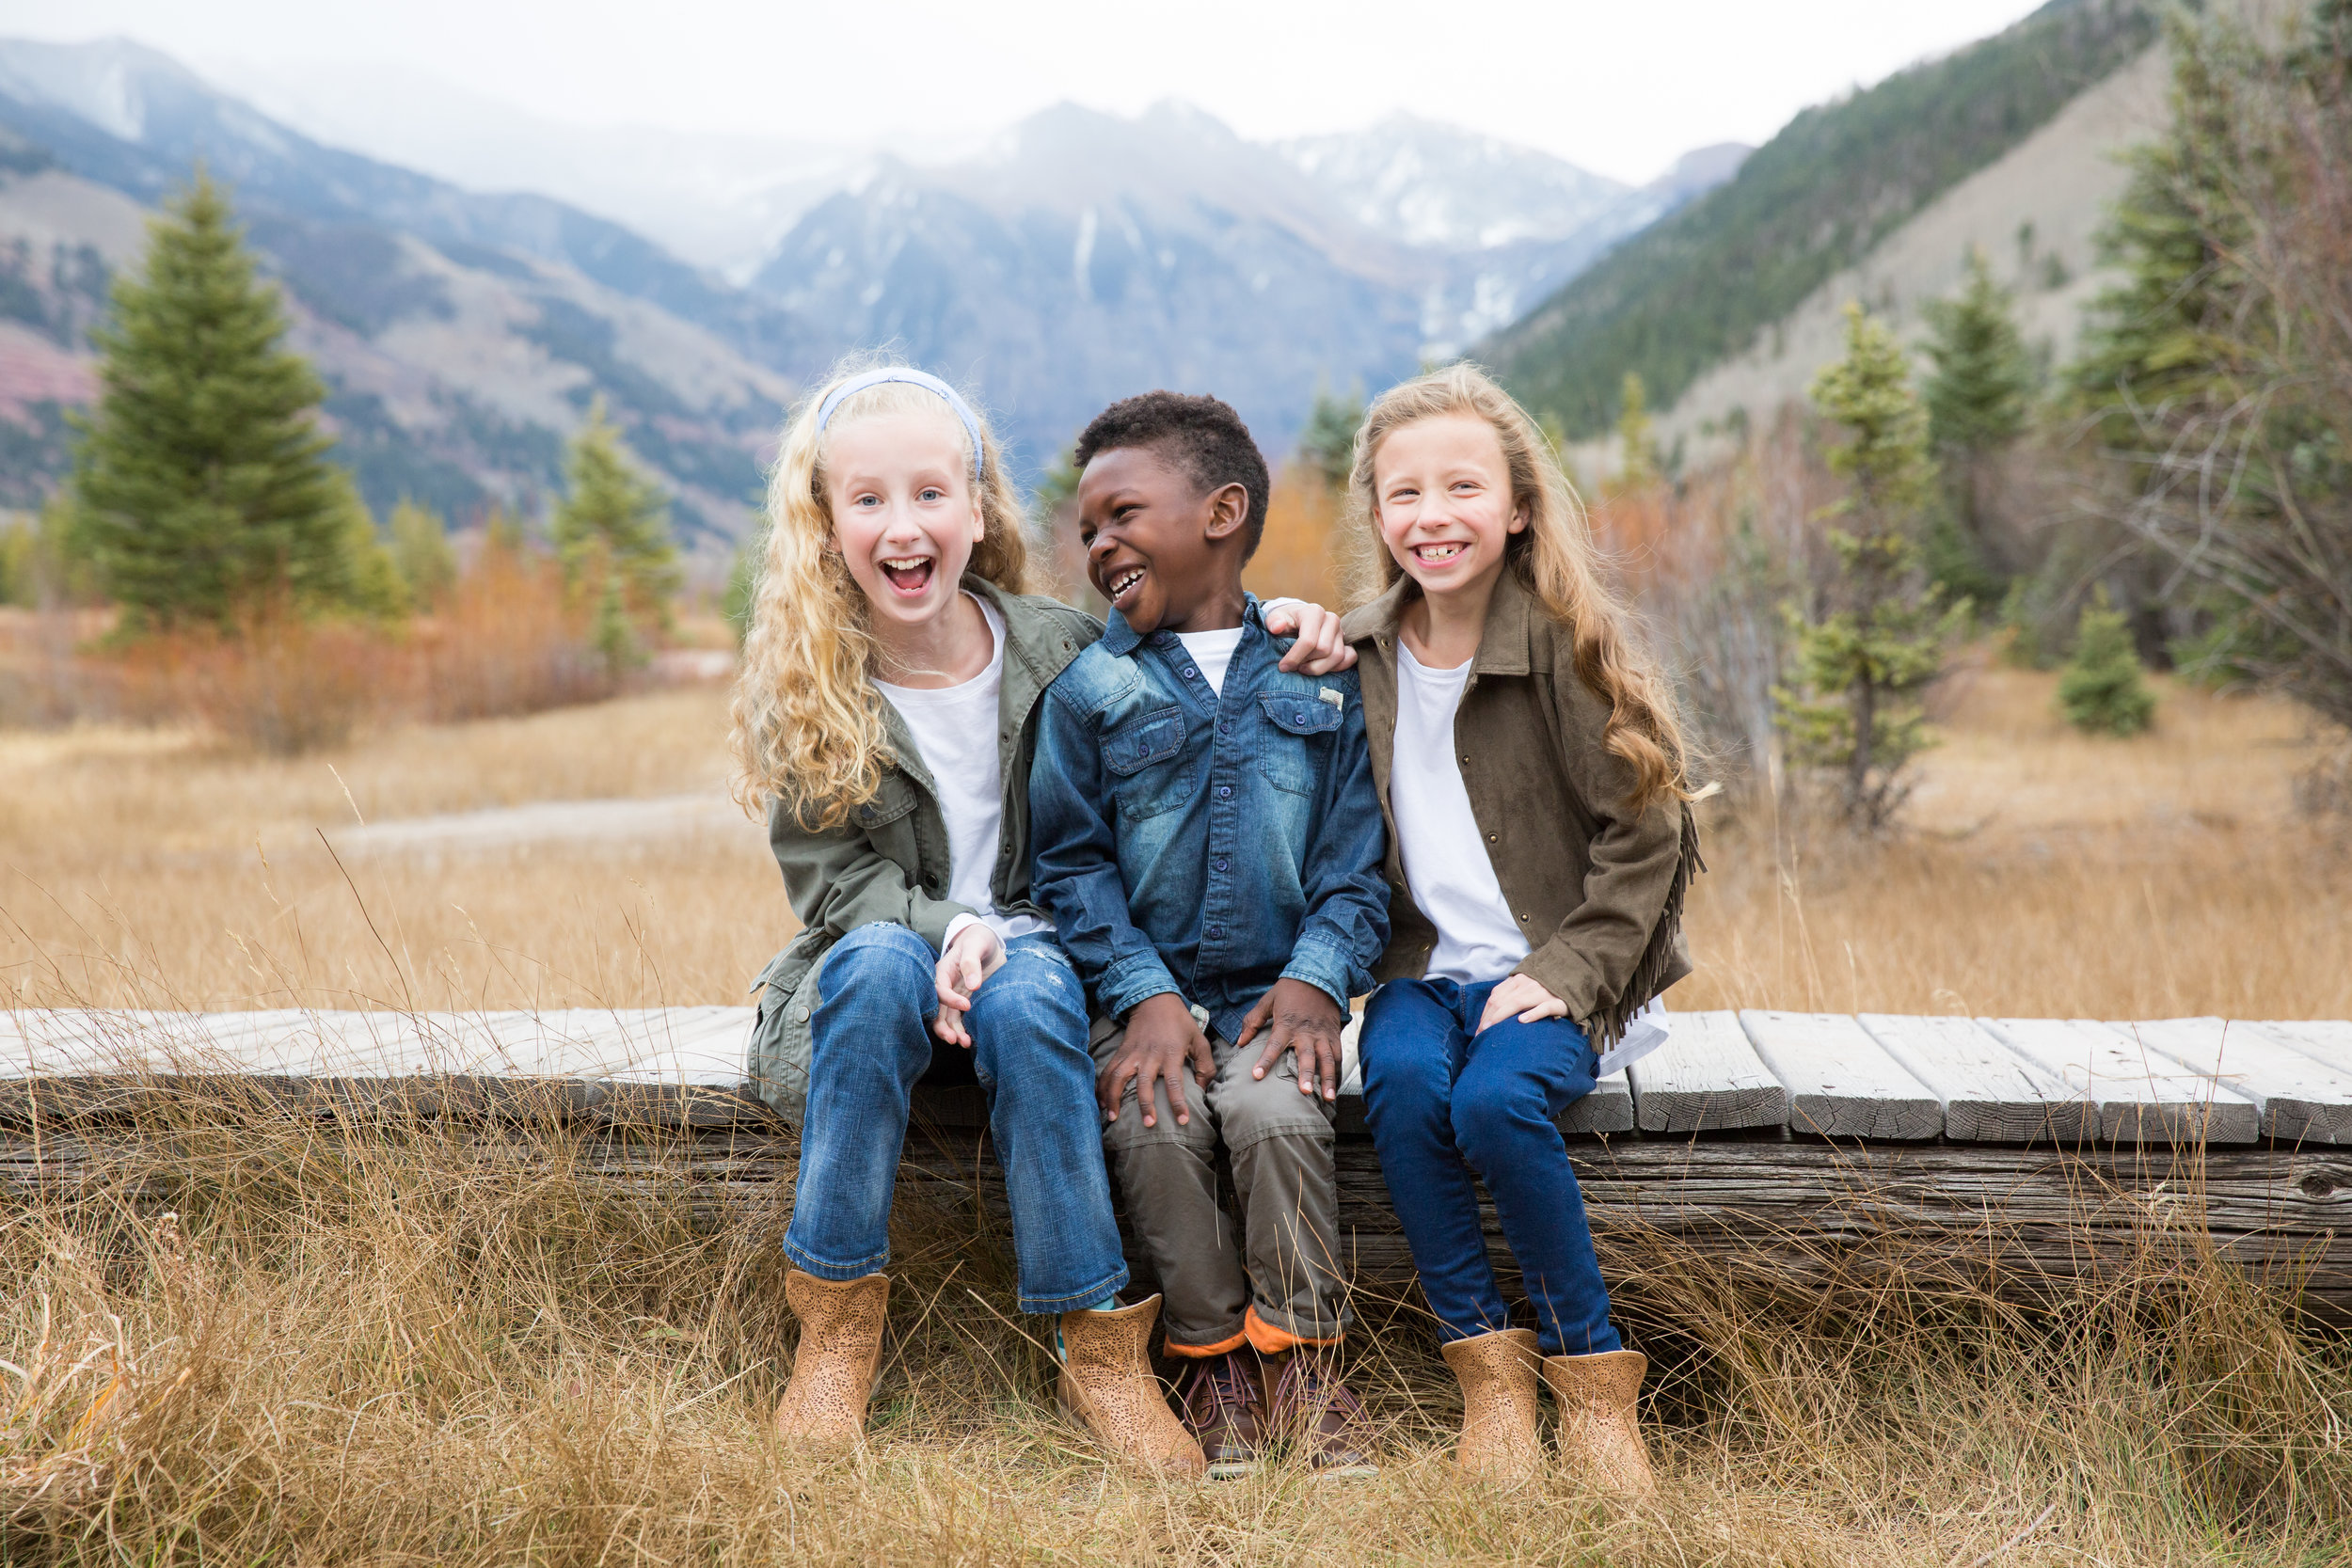 Telluride Family Photography - laughter